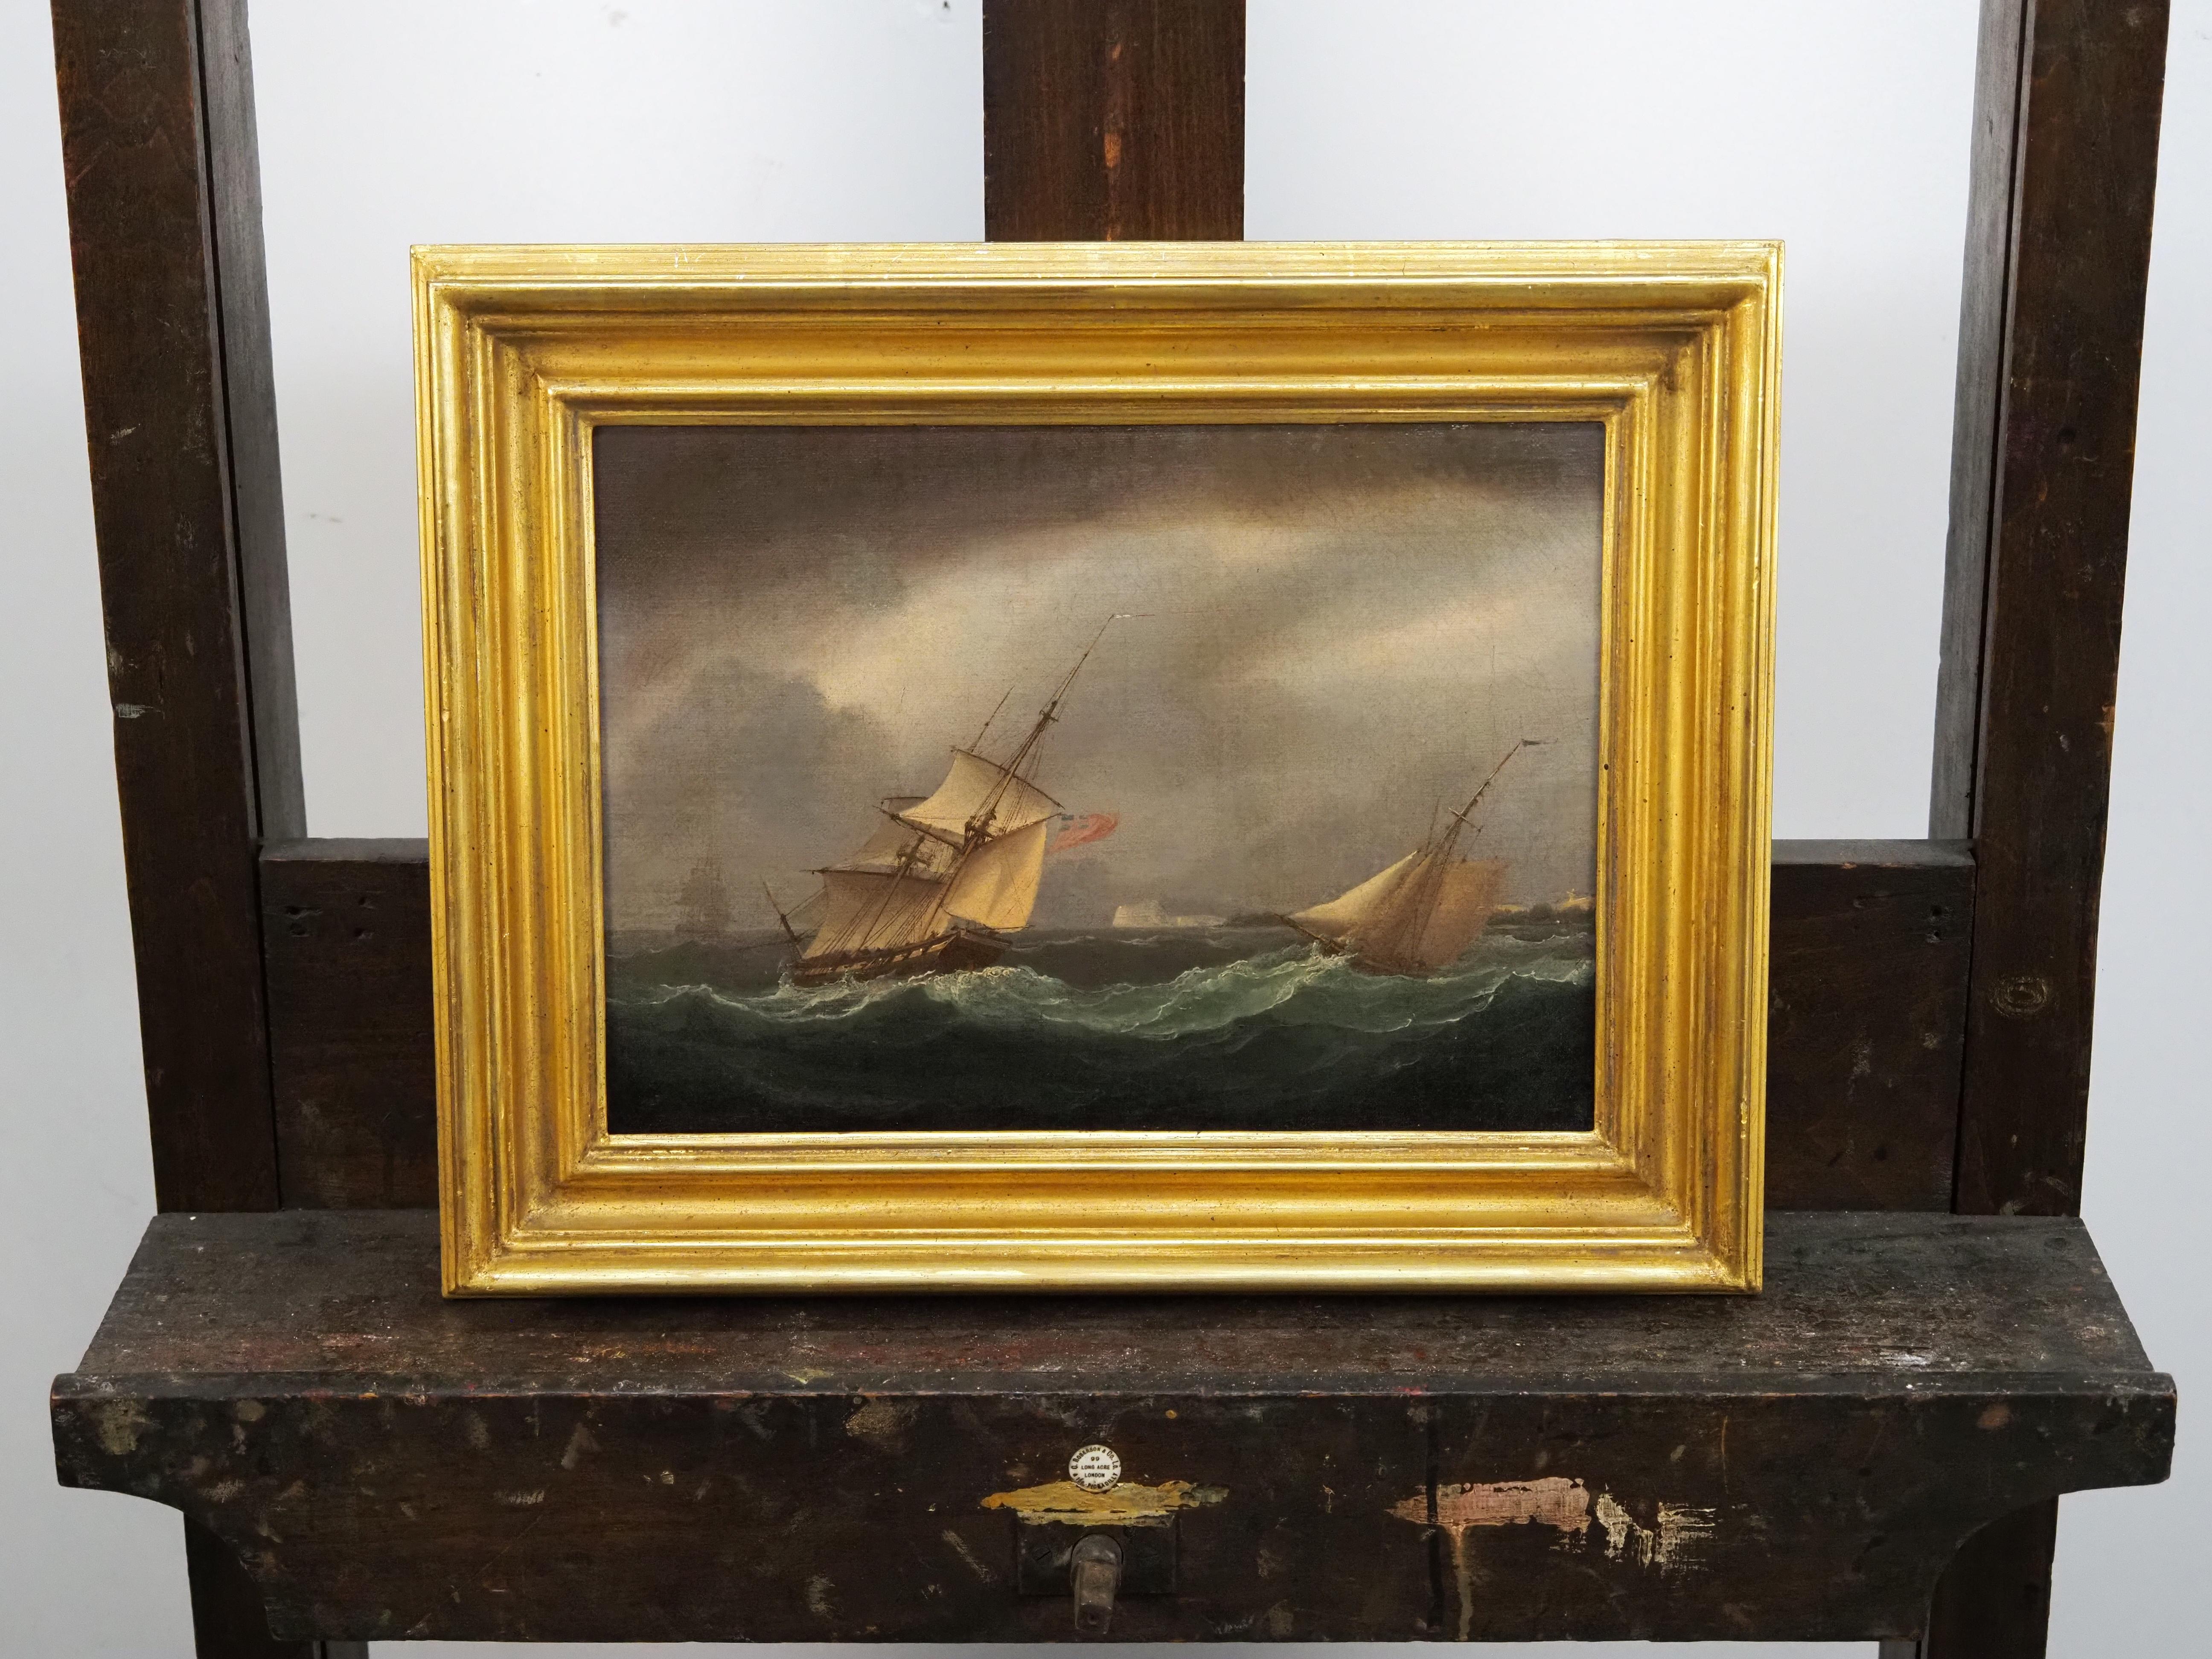 Thomas Buttersworth (1768-1842)
Shipping in choppy coastal waters
signed and dated lower left
Oil on canvas
Canvas Size - 9 x 12 1/2 in
Framed Size - 13 x 16 1/2

Immerse yourself in the vibrant maritime art with Thomas Buttersworth, a luminary